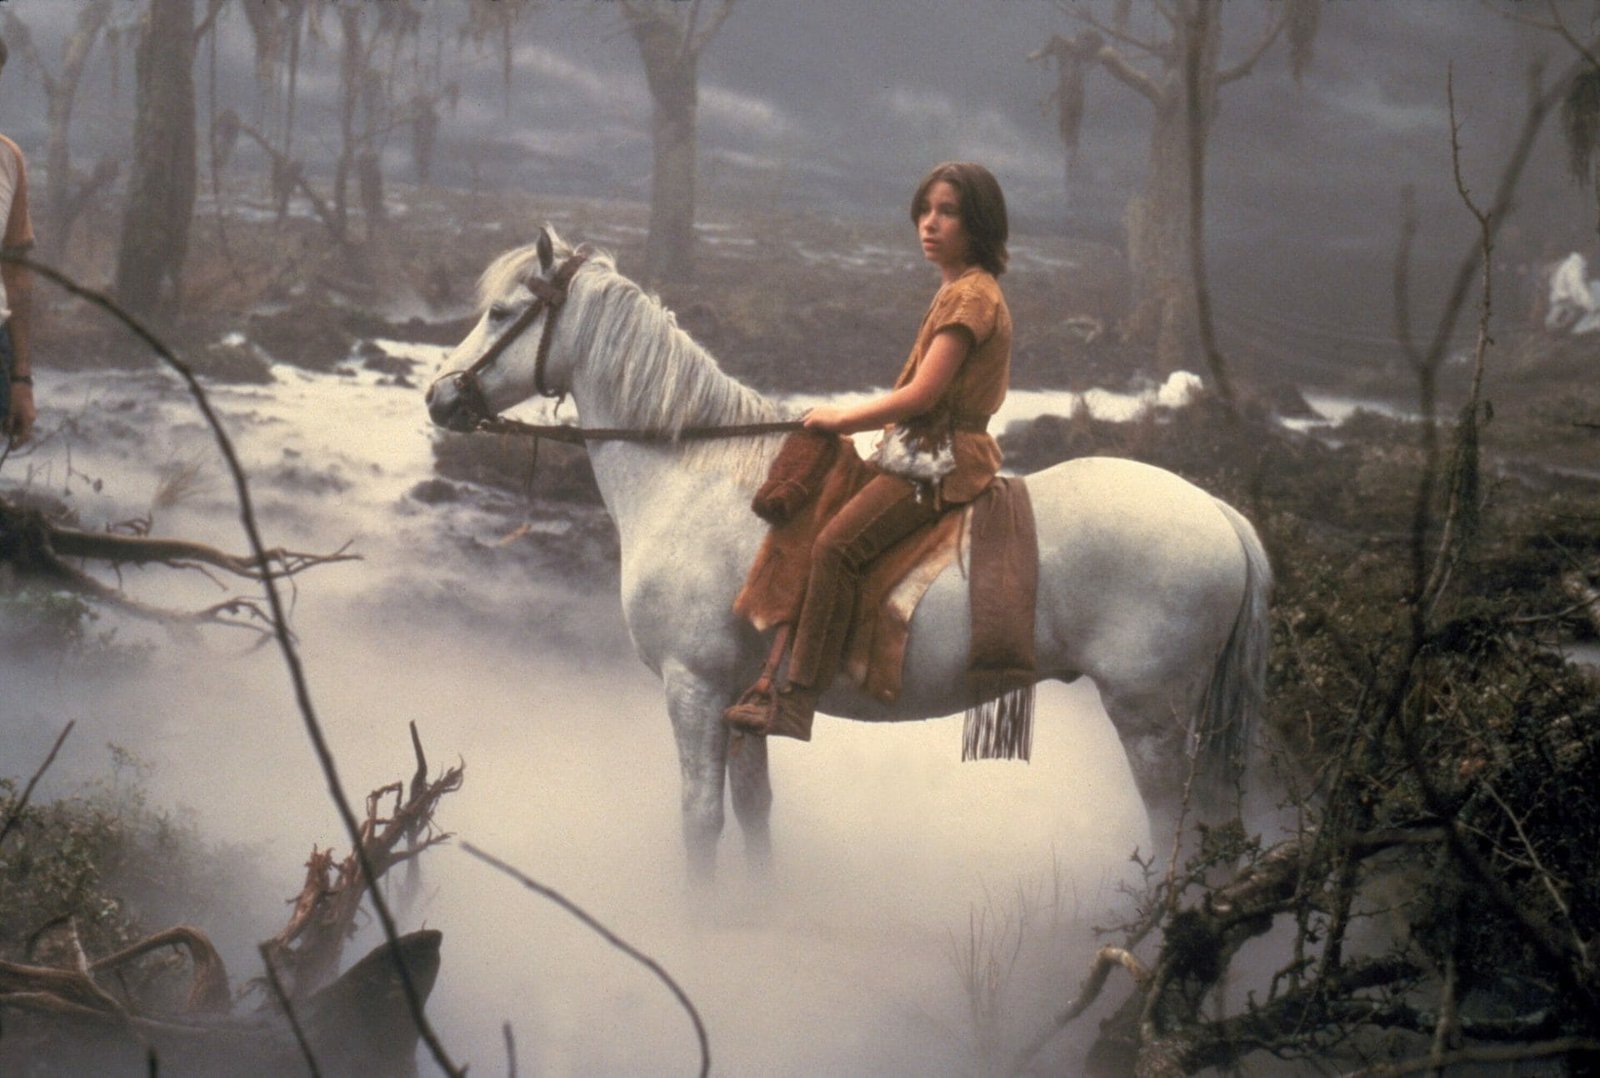 Family Movies on Netflix: The NeverEnding Story